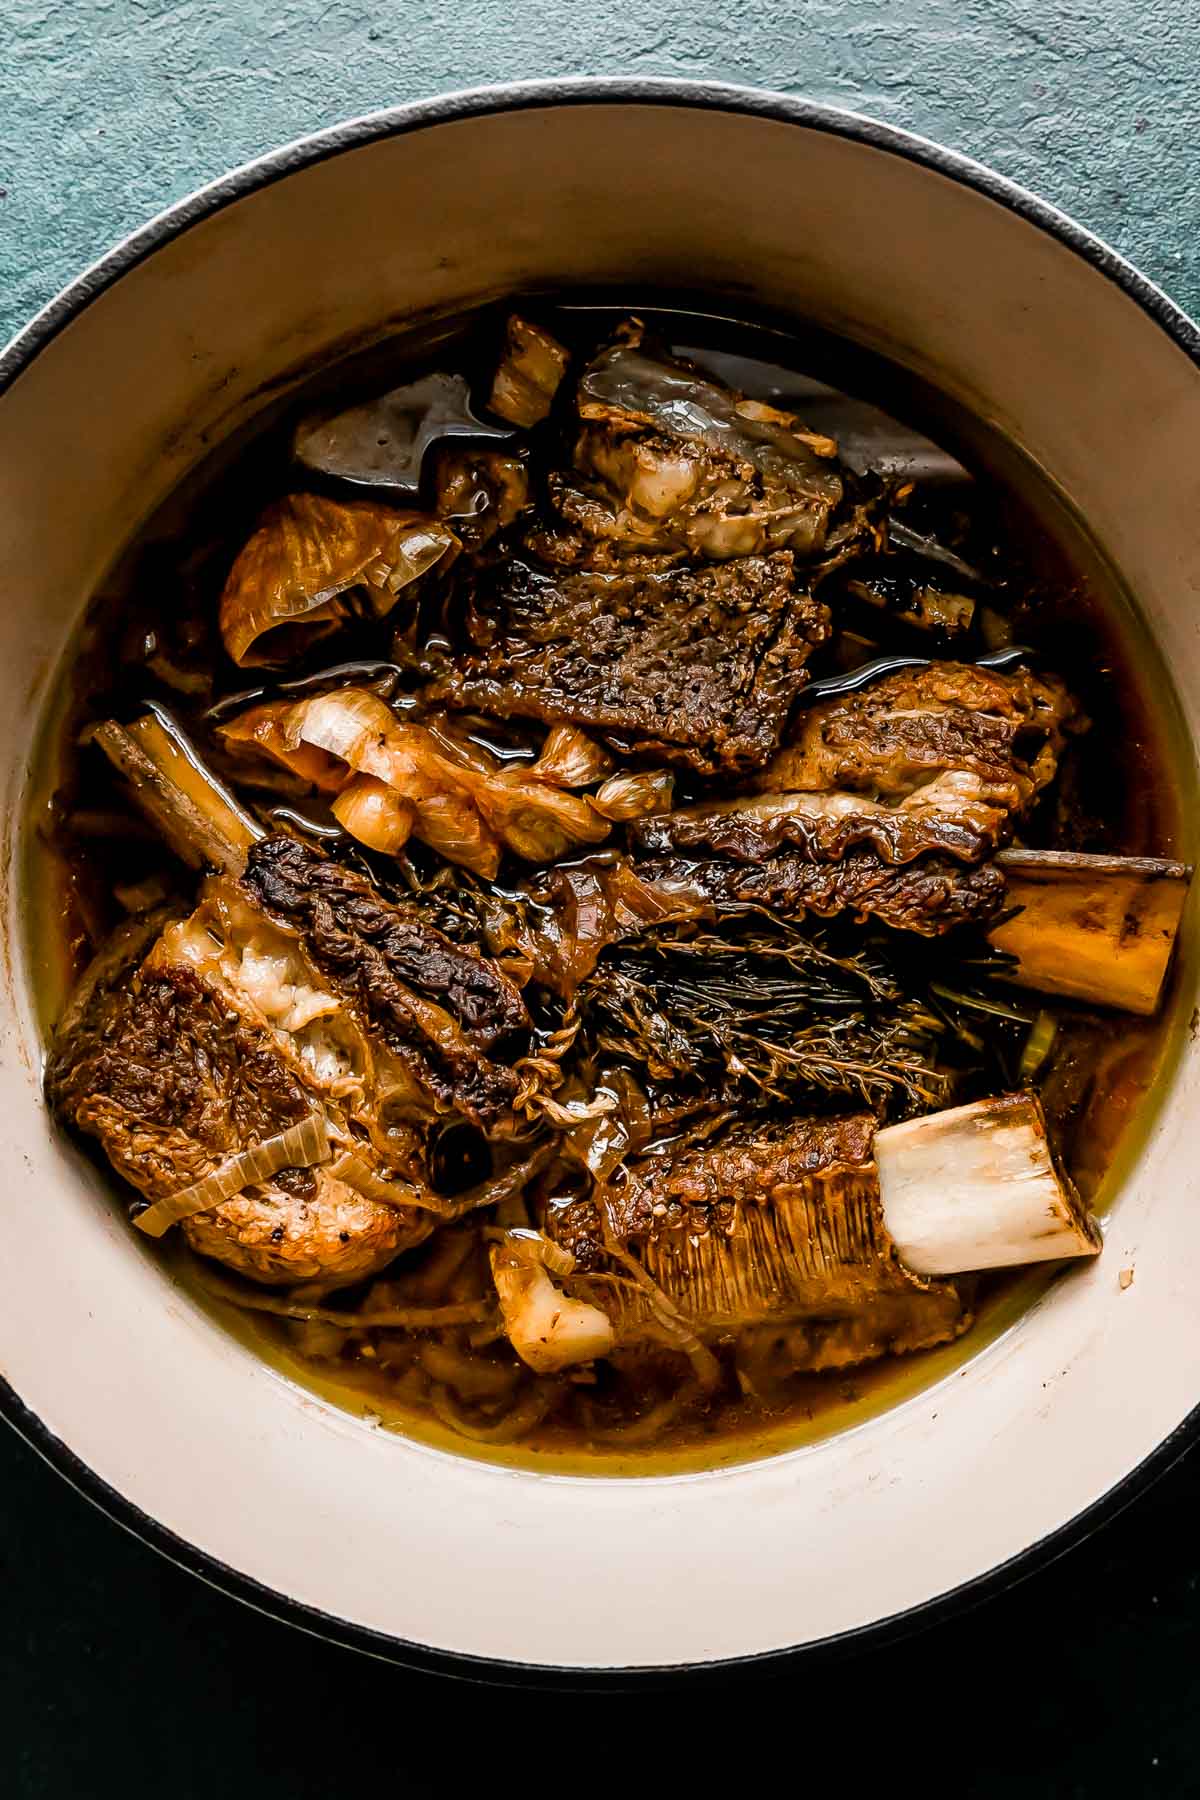 Braised beef short ribs rest inside of a white ceramic pot filled with braising liquid. The pot sits atop a dark green textured surface.